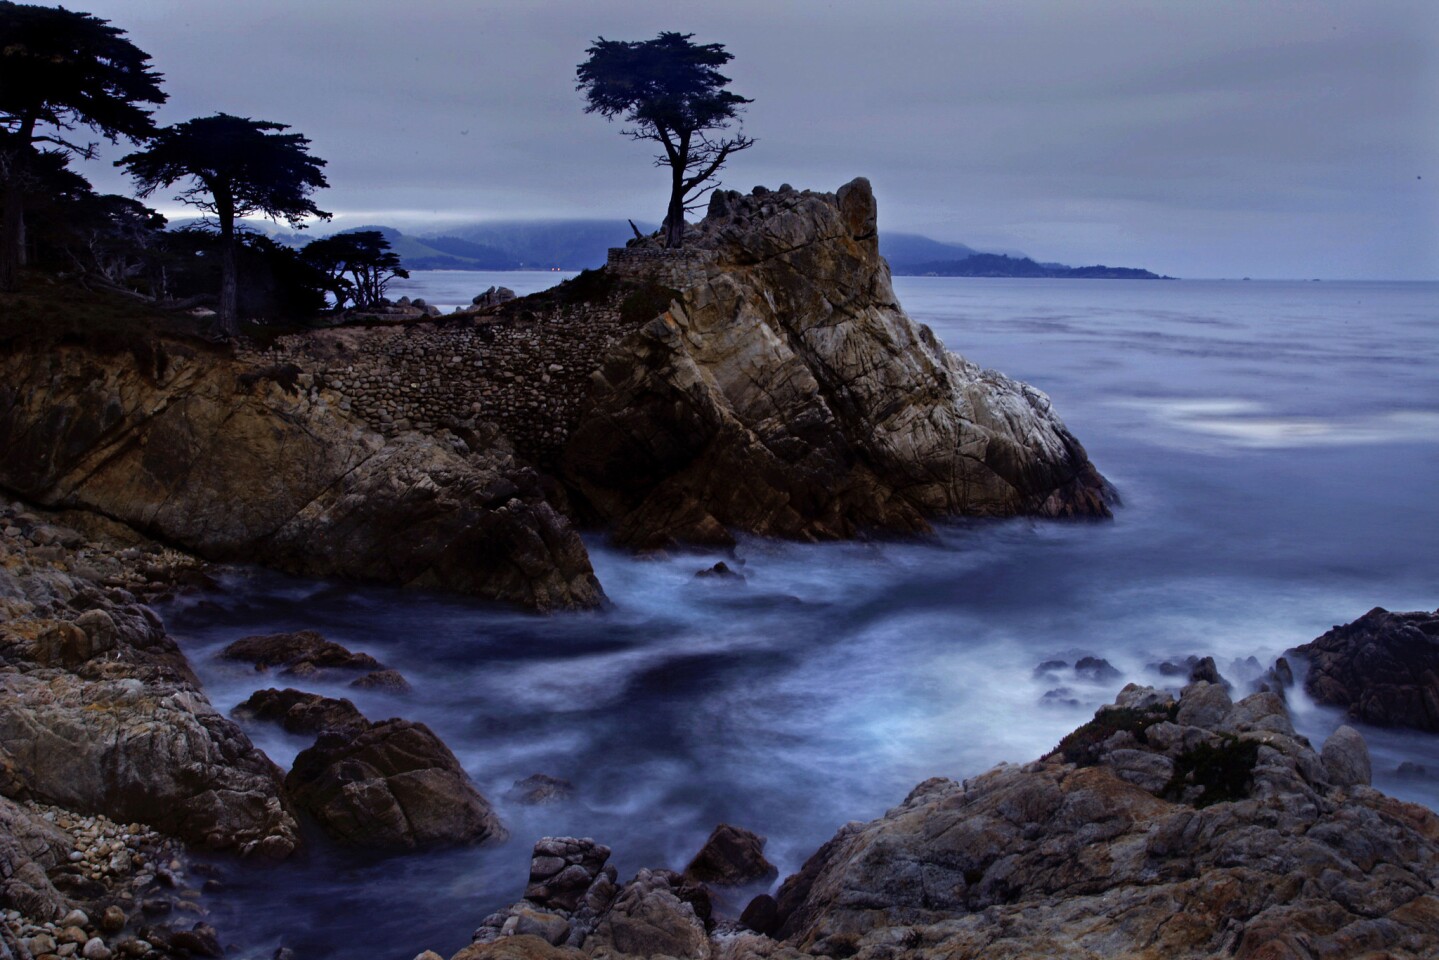 The Lone Cypress stands along famously scenic 17-Mile Drive, raked by wind, swaddled in fog, clinging to its wave-lashed granite pedestal like God's advertisement for rugged individualism.